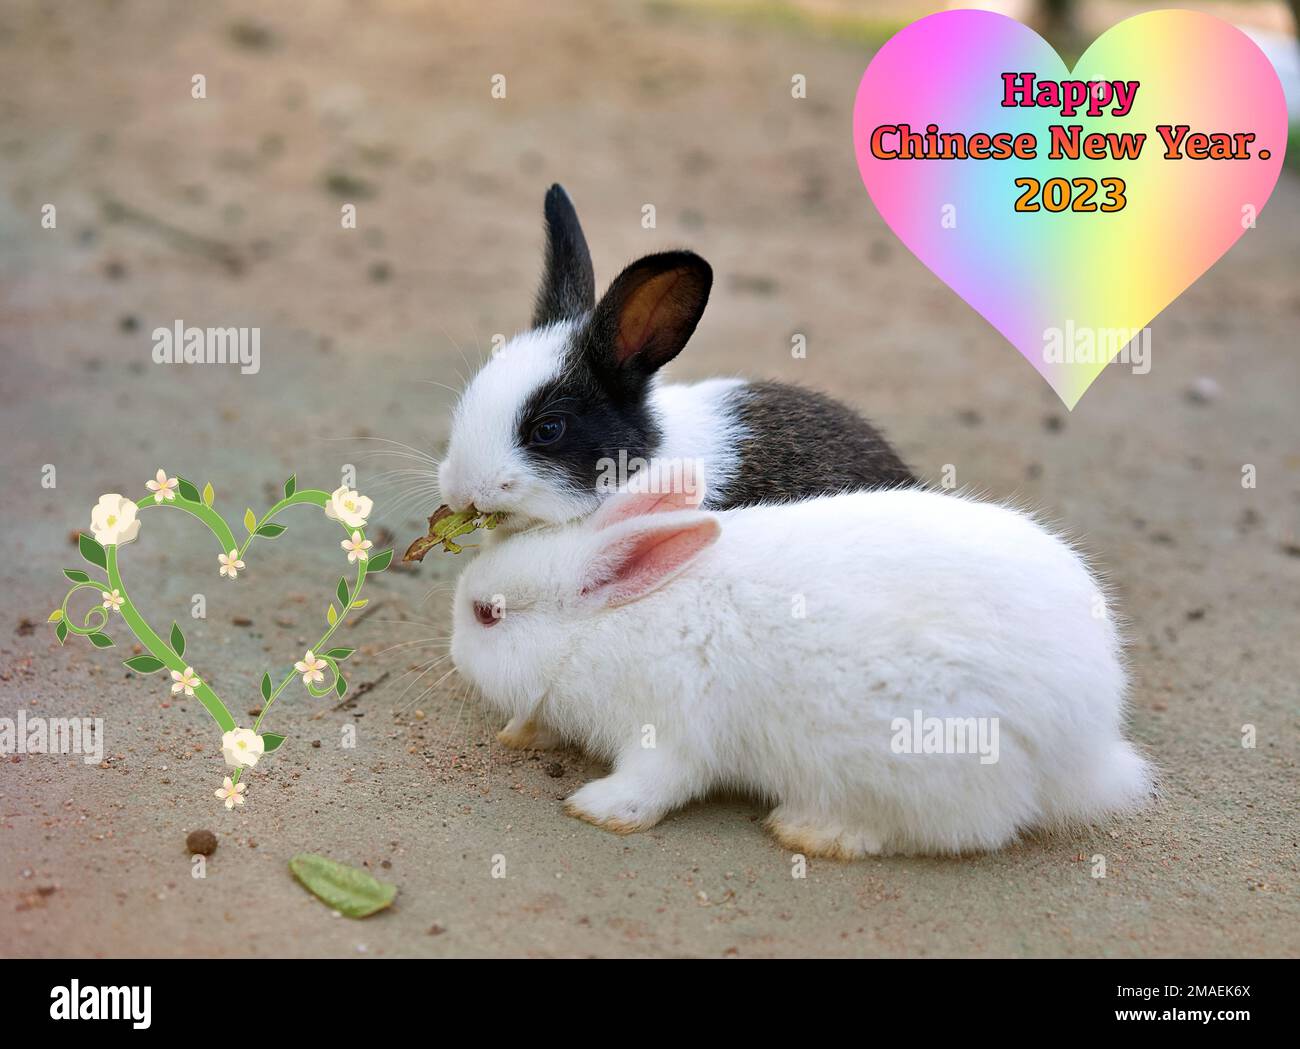 Two adorable rabbits sharing a meal, with Happy Chinese New Year greeting. Stock Photo